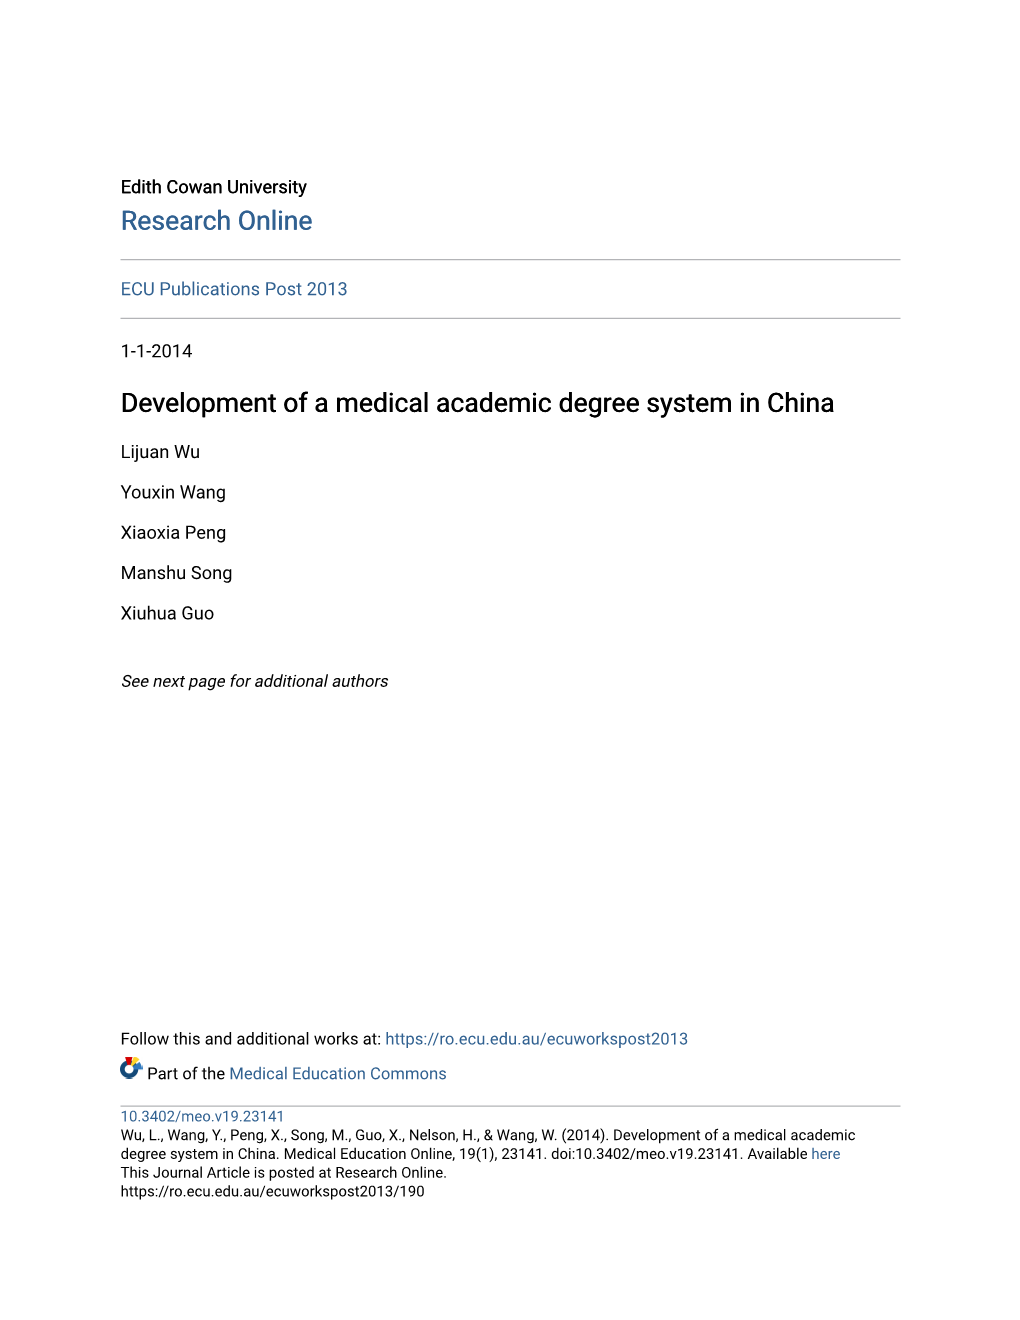 Development of a Medical Academic Degree System in China